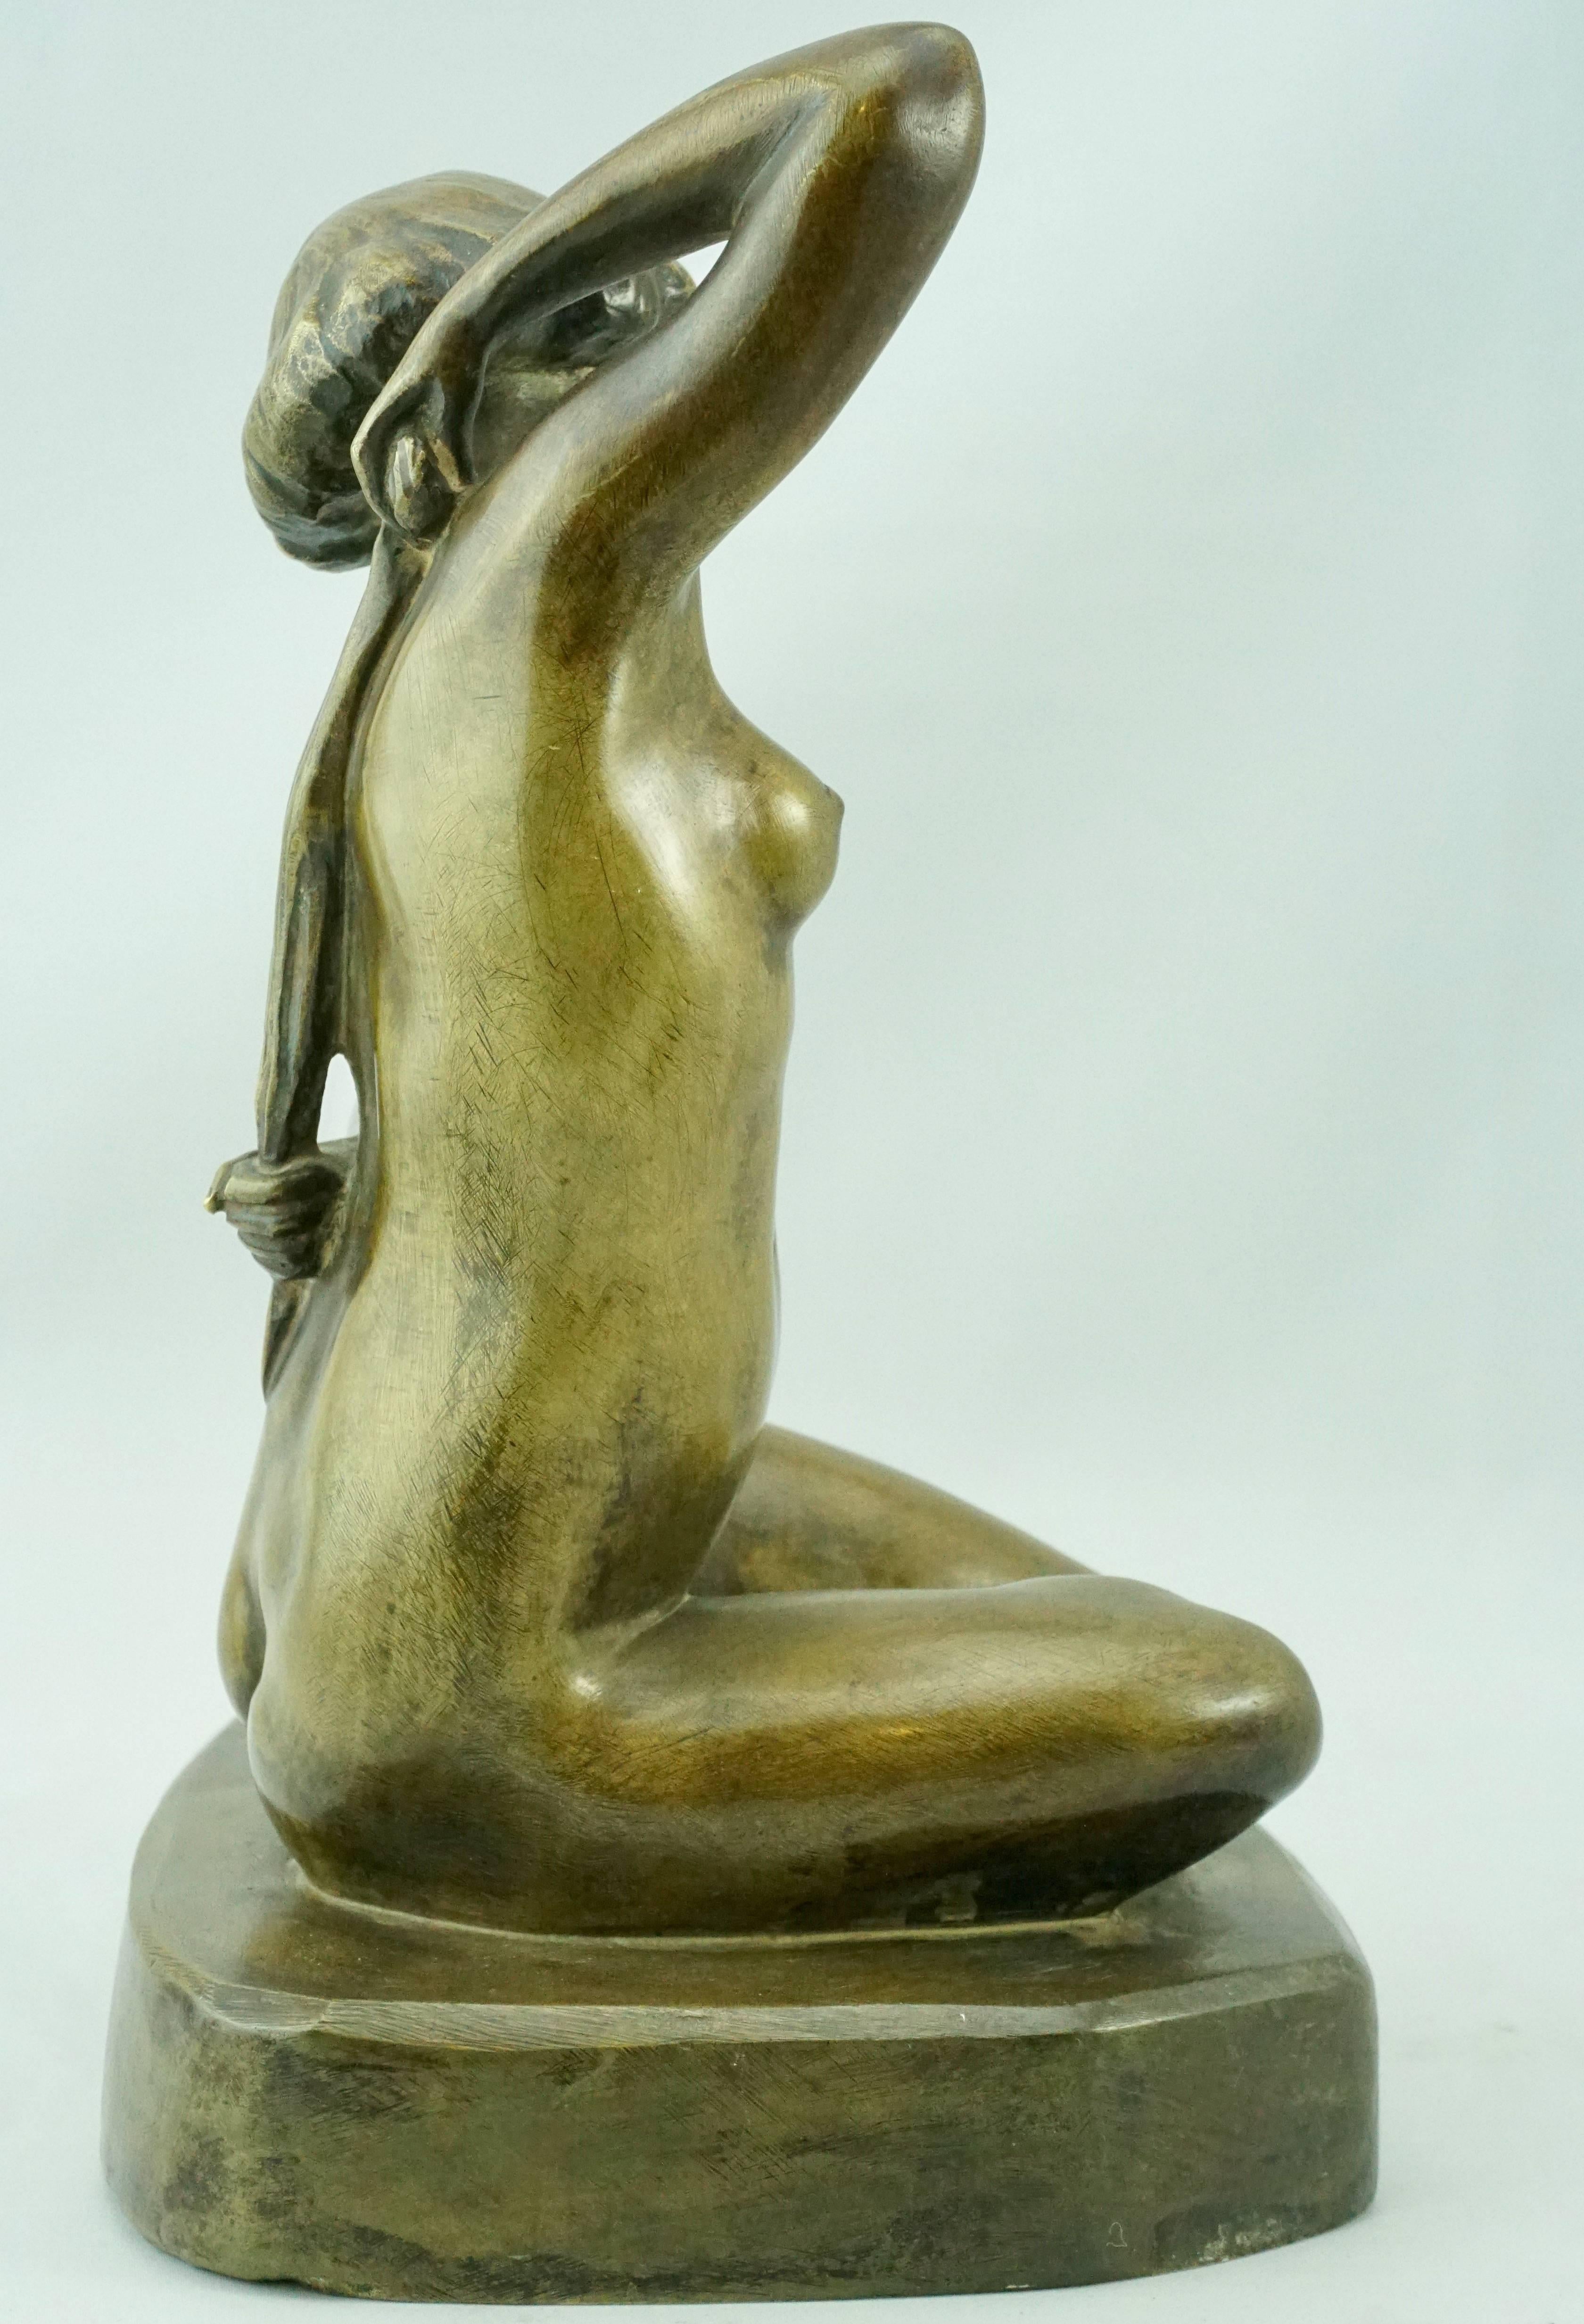 French Art Deco bronze sitting nude by F. Trinque, 1930. A gorgeous Art Deco woman stretching her arms and drying her back with a towel possibly after a swim or bath with a rich golden brown patina. 

Measures: Height 9 inches (22.9 cm).

Inscribed